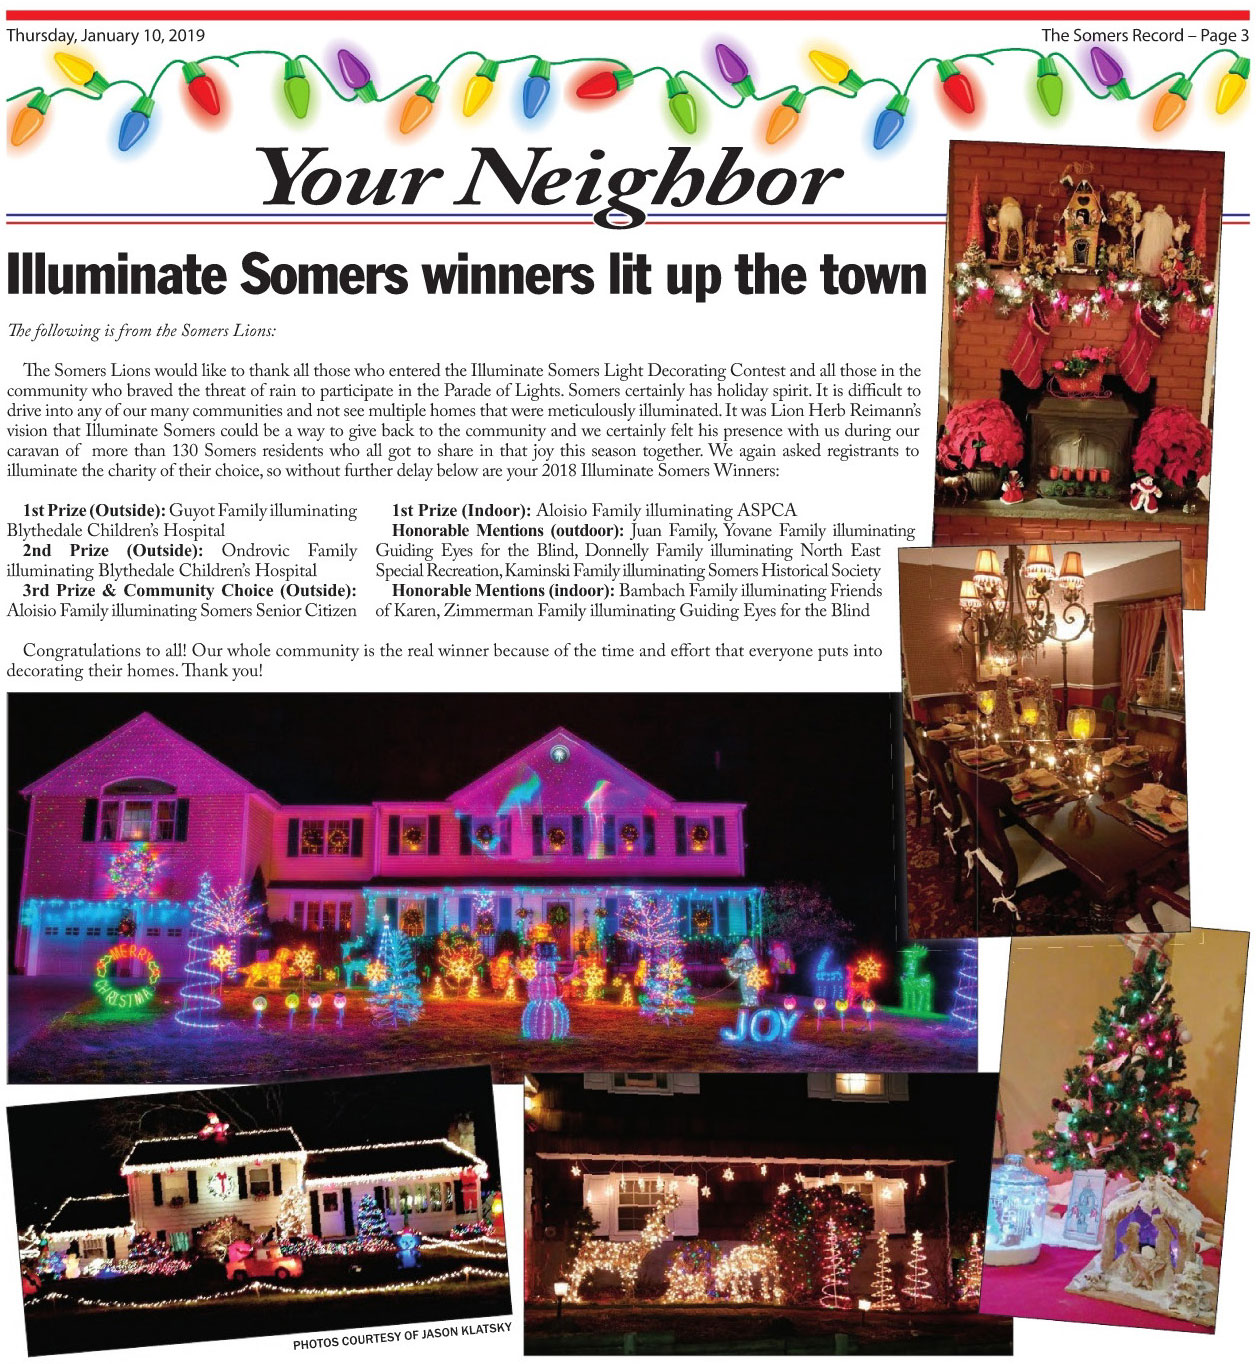 The-Somers-Record-1.10.19.jpg